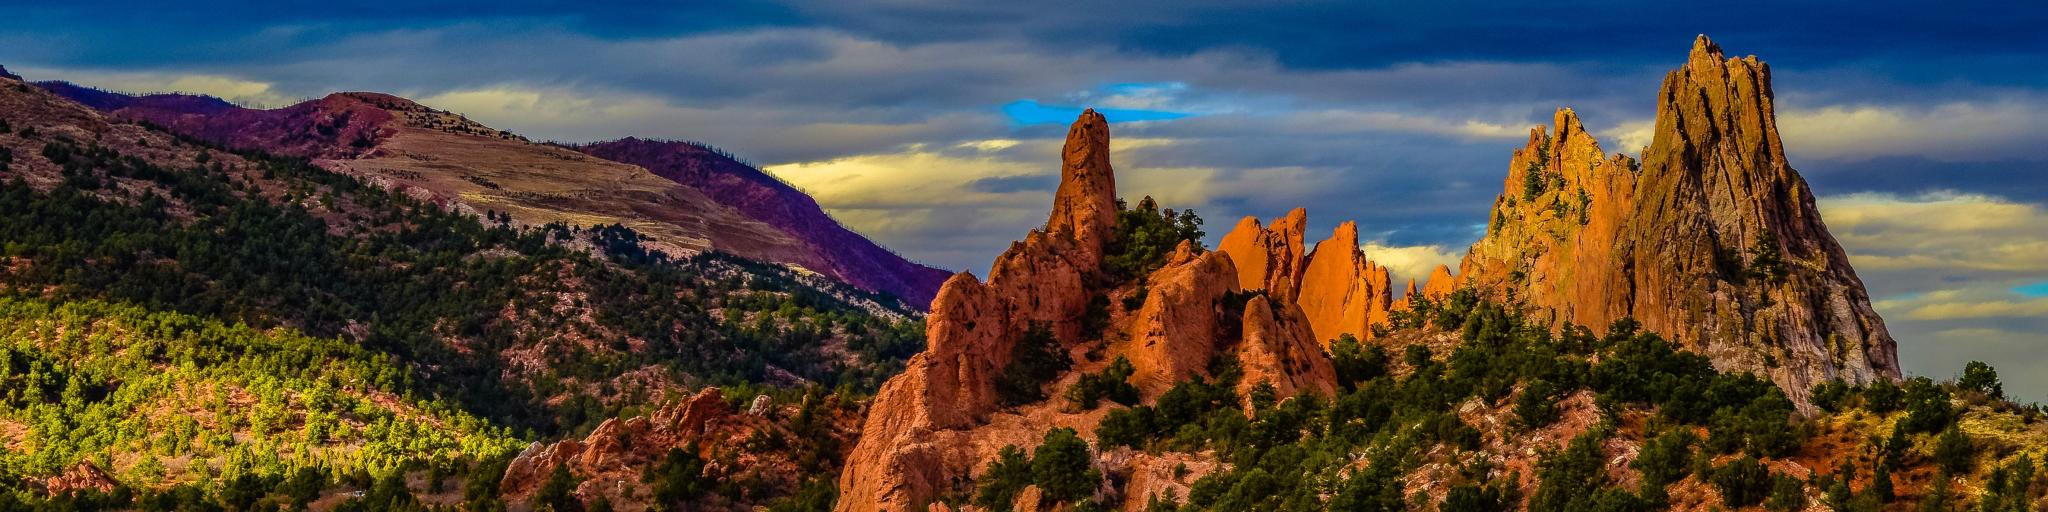 Garden of the Gods, Colorado Springs, at dusk with the rugged mountains in the background